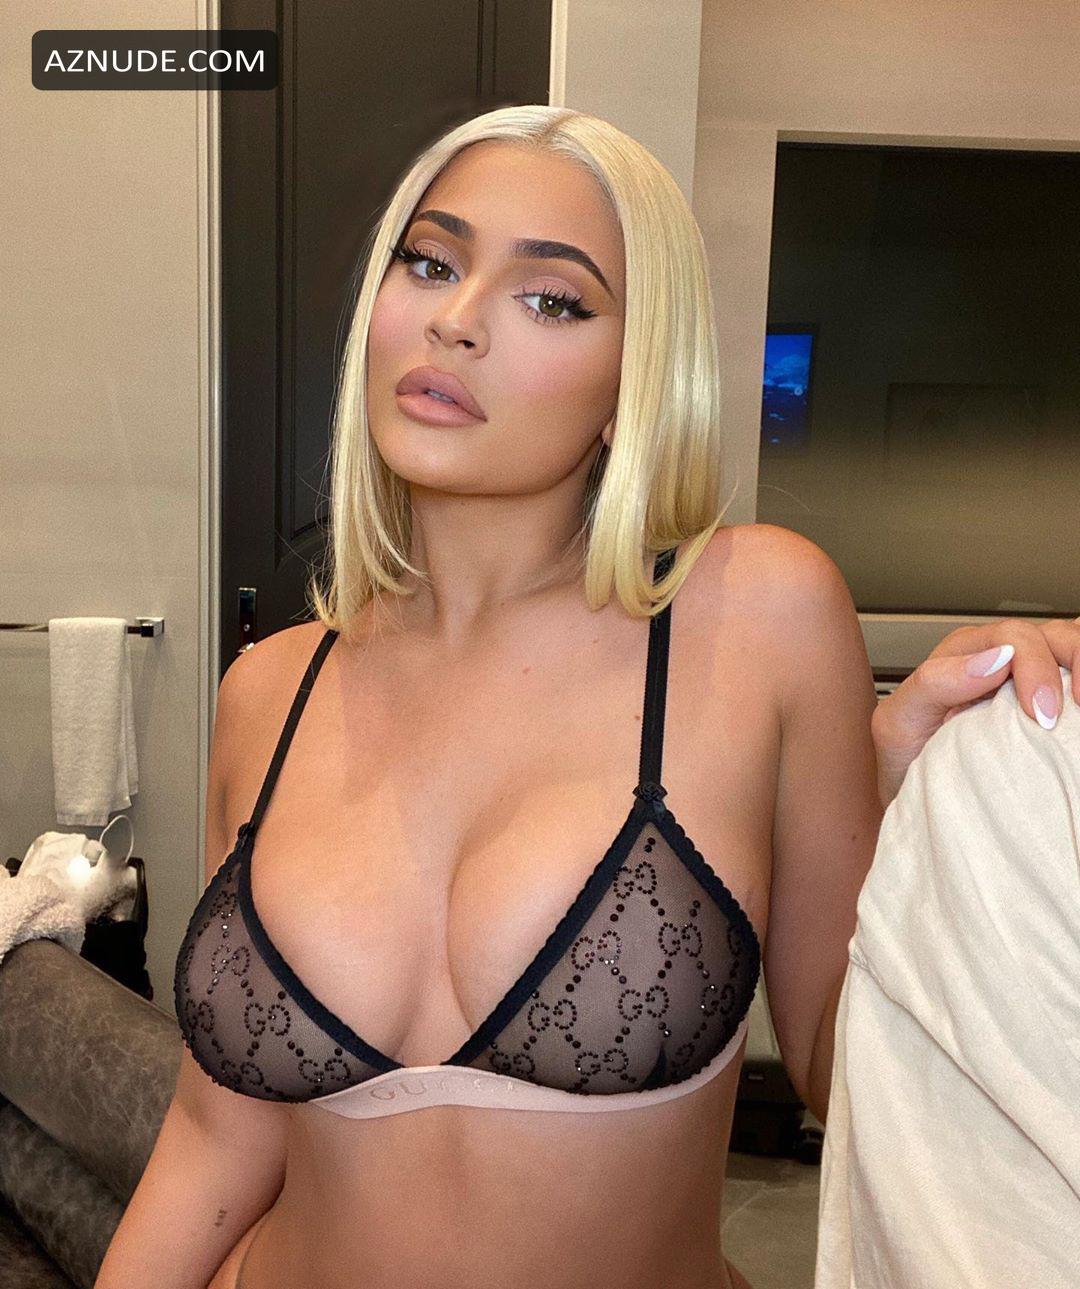 Kylie Jenner Shows Off Her Tits Posing In A Bra For Her Followers On Instagram AZNude